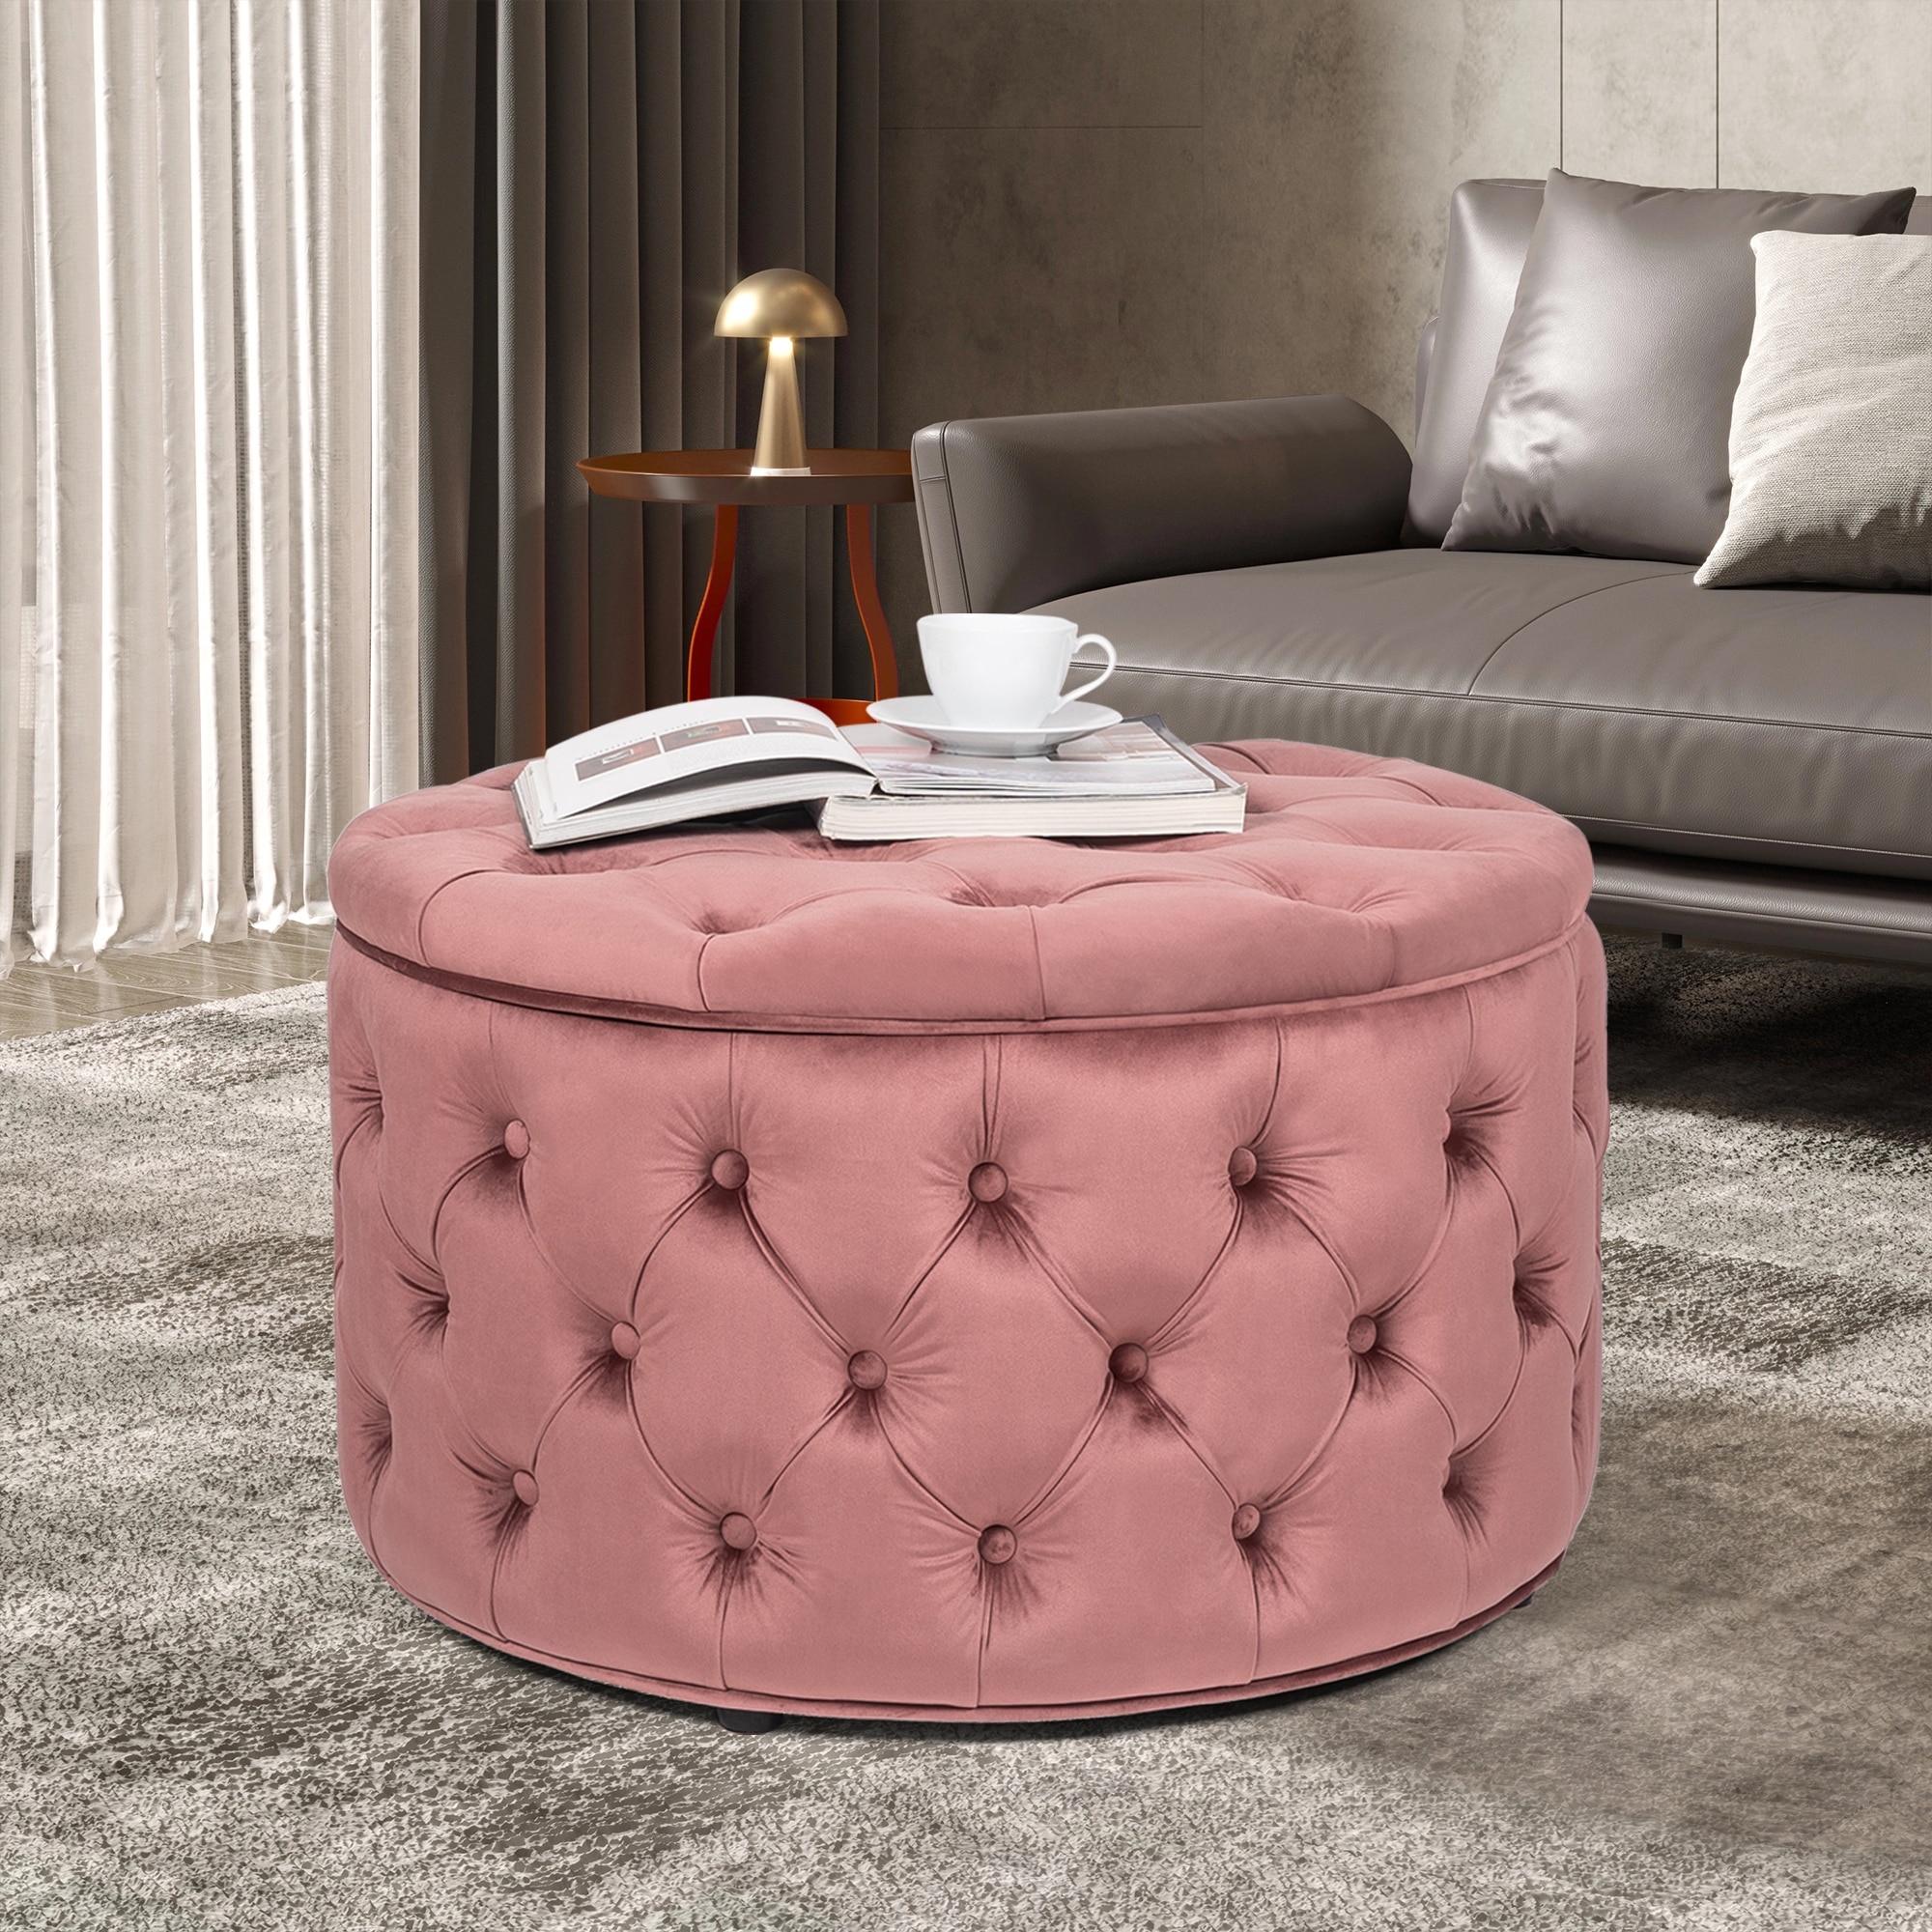 https://ak1.ostkcdn.com/images/products/is/images/direct/f6dd97888ab1620cb0f801239cd040fa050590c5/Adeco-Round-Storage-Ottoman-Button-Tufted-Footrest-Stool-Bench.jpg